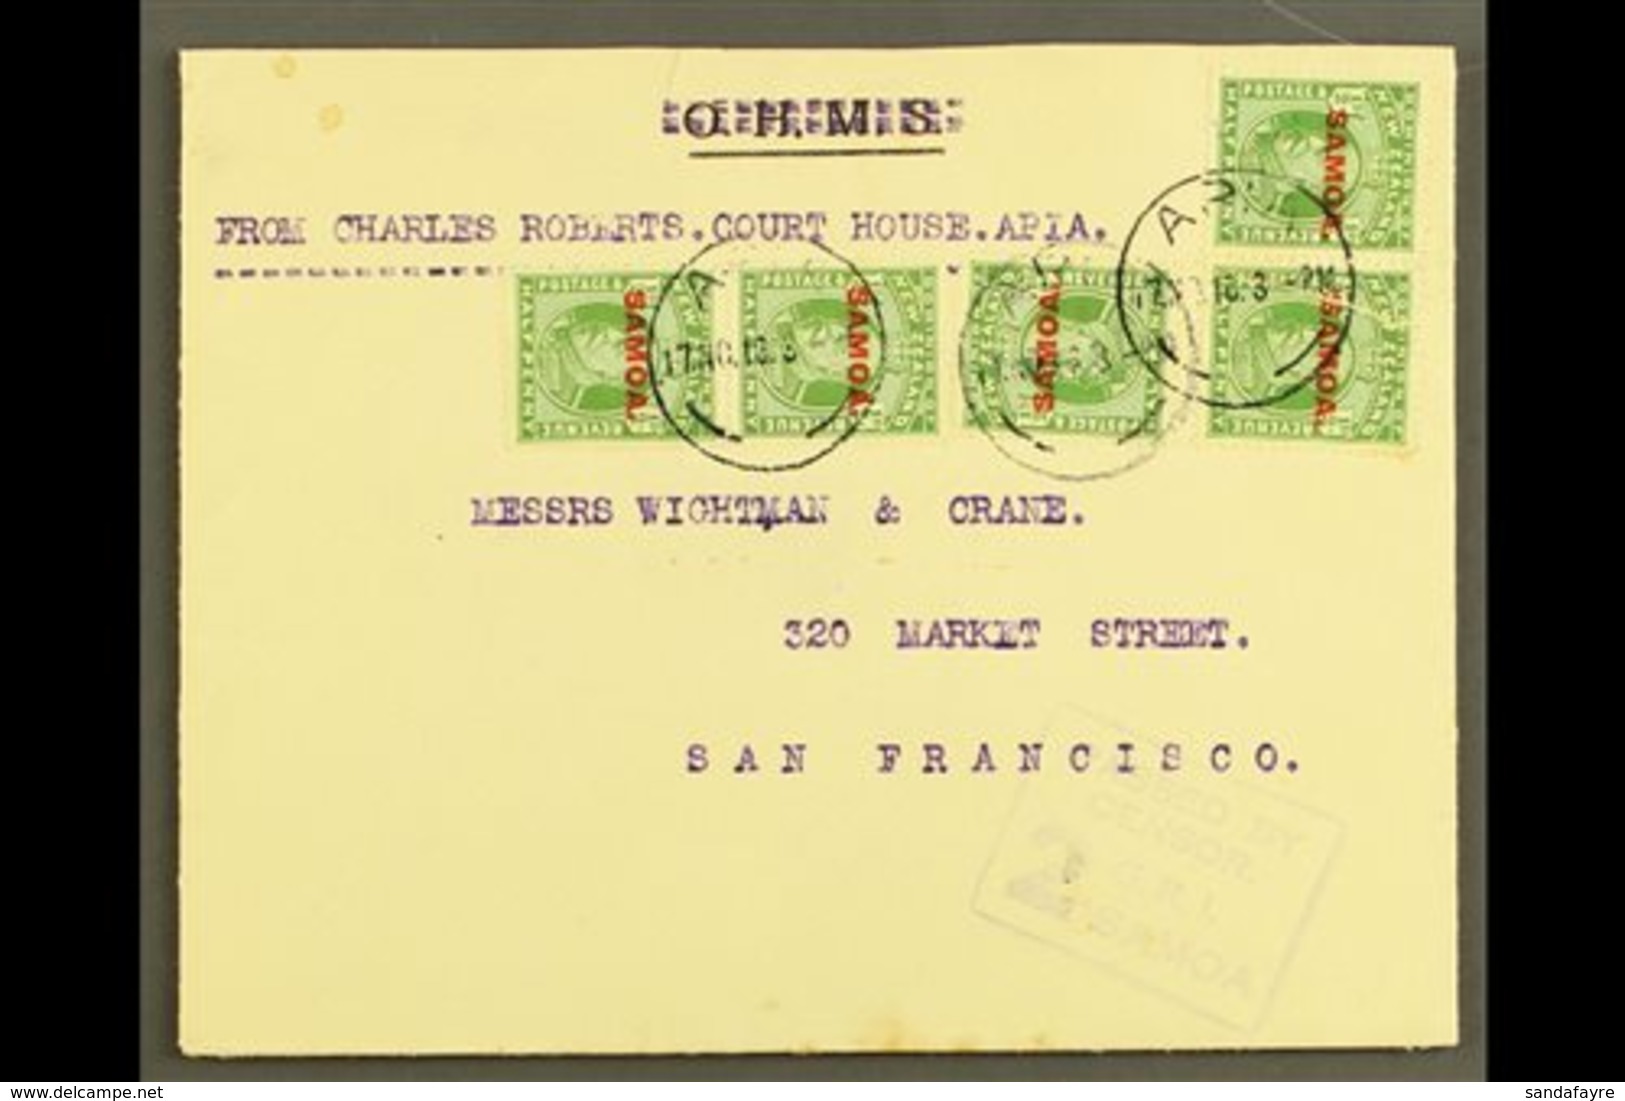 \Y 1916\Y Official Cover With "O.H.M.S." Obliterated To USA, Franked ½d X5, SG 115, Apia 17.11.16 Postmarks, Censor "2"  - Samoa